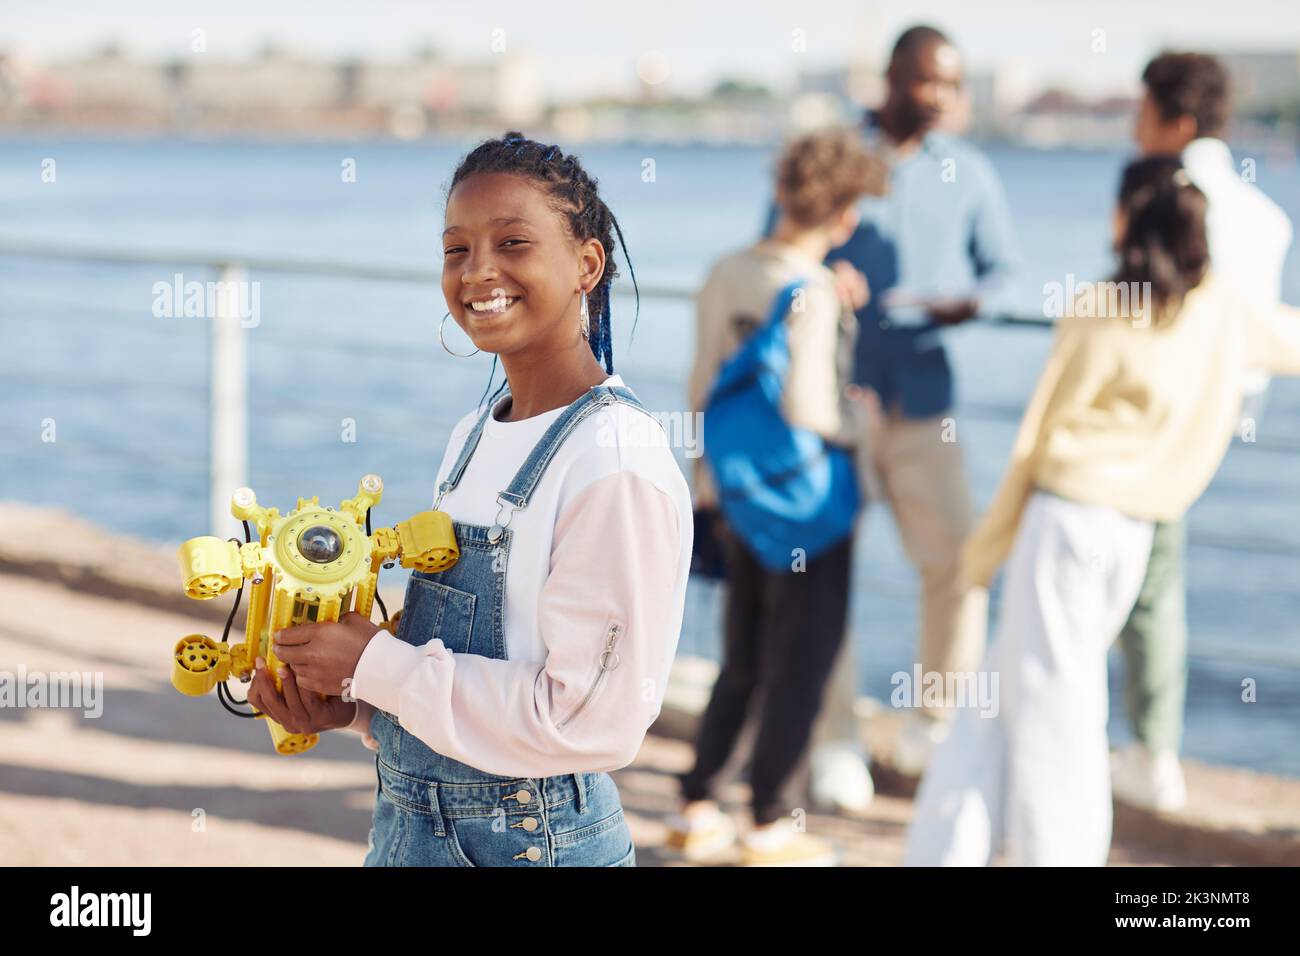 Waist up portrait of black teenage girl holding robot model and smiling at camera during outdoor engineering class with kids in background, copy space Stock Photo